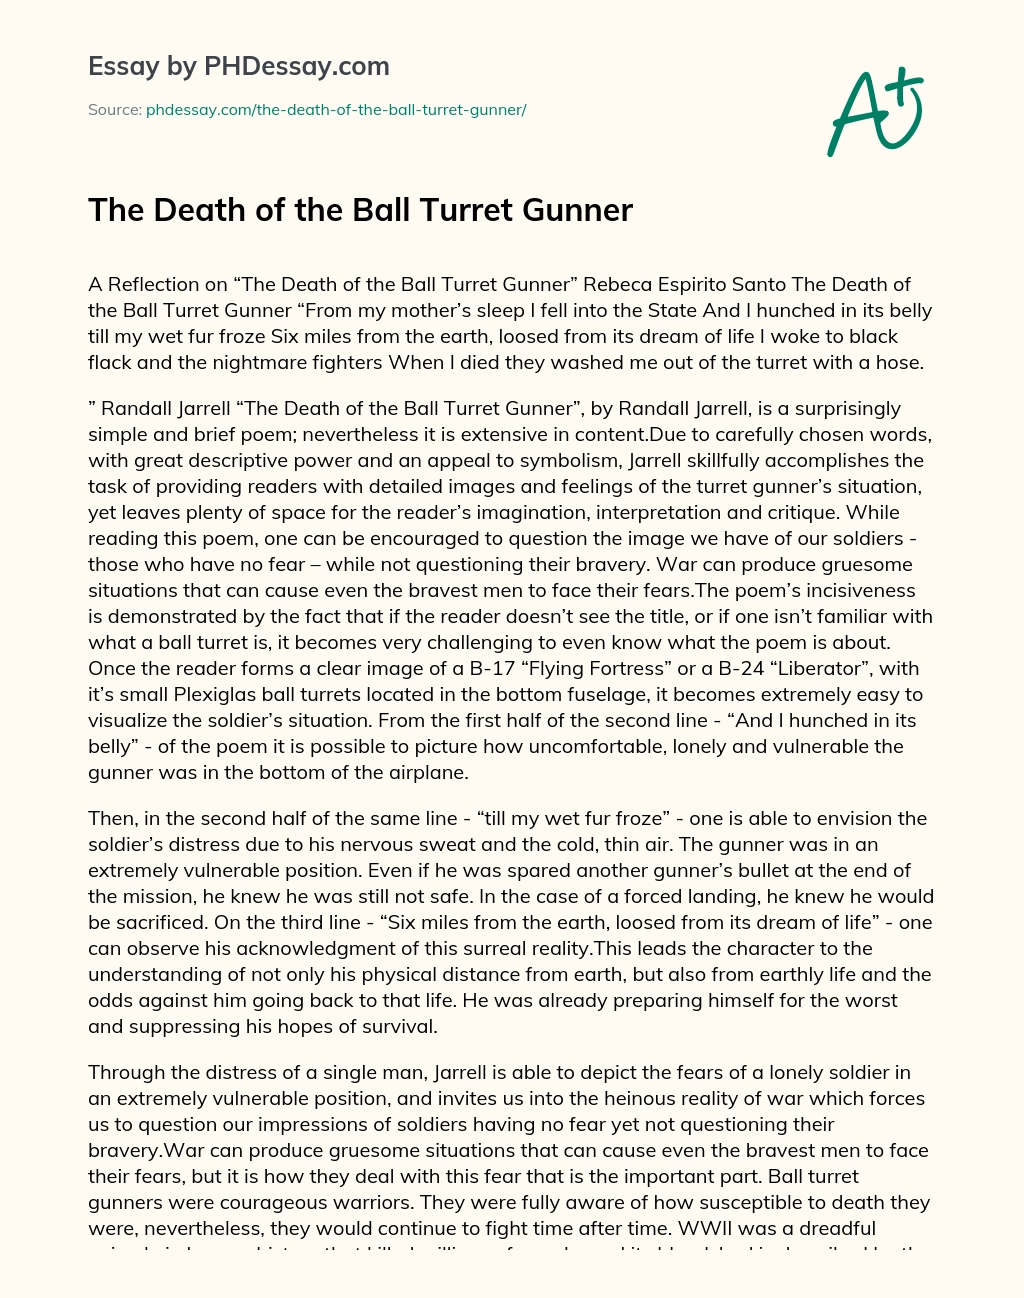 The Death of the Ball Turret Gunner essay